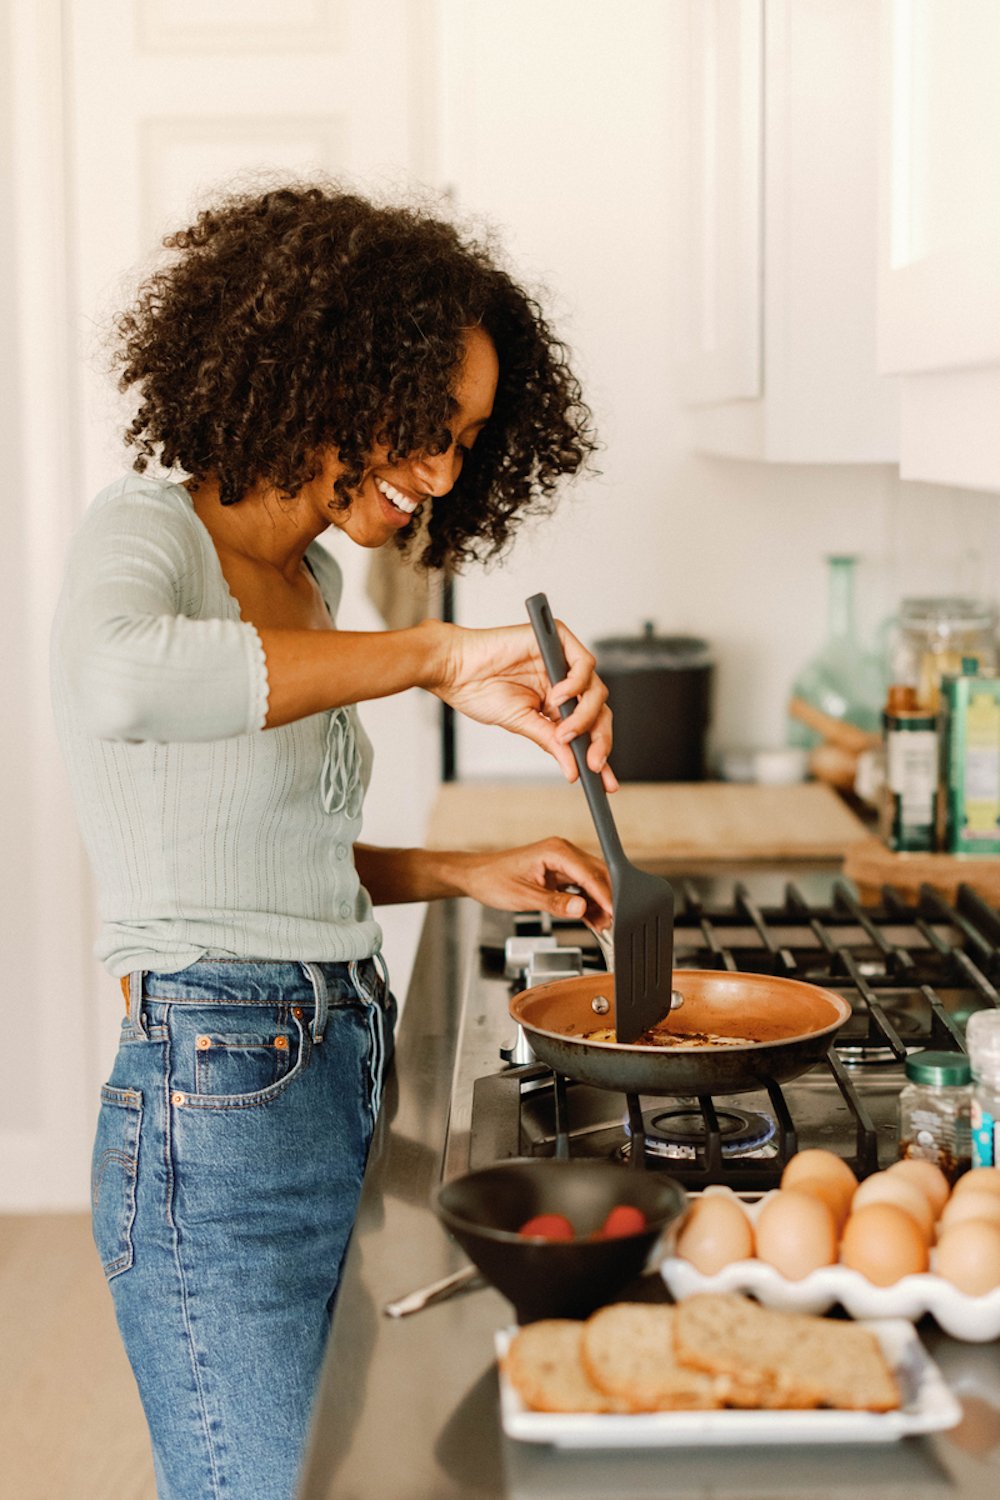 Woman cooking eggs in kitchen.